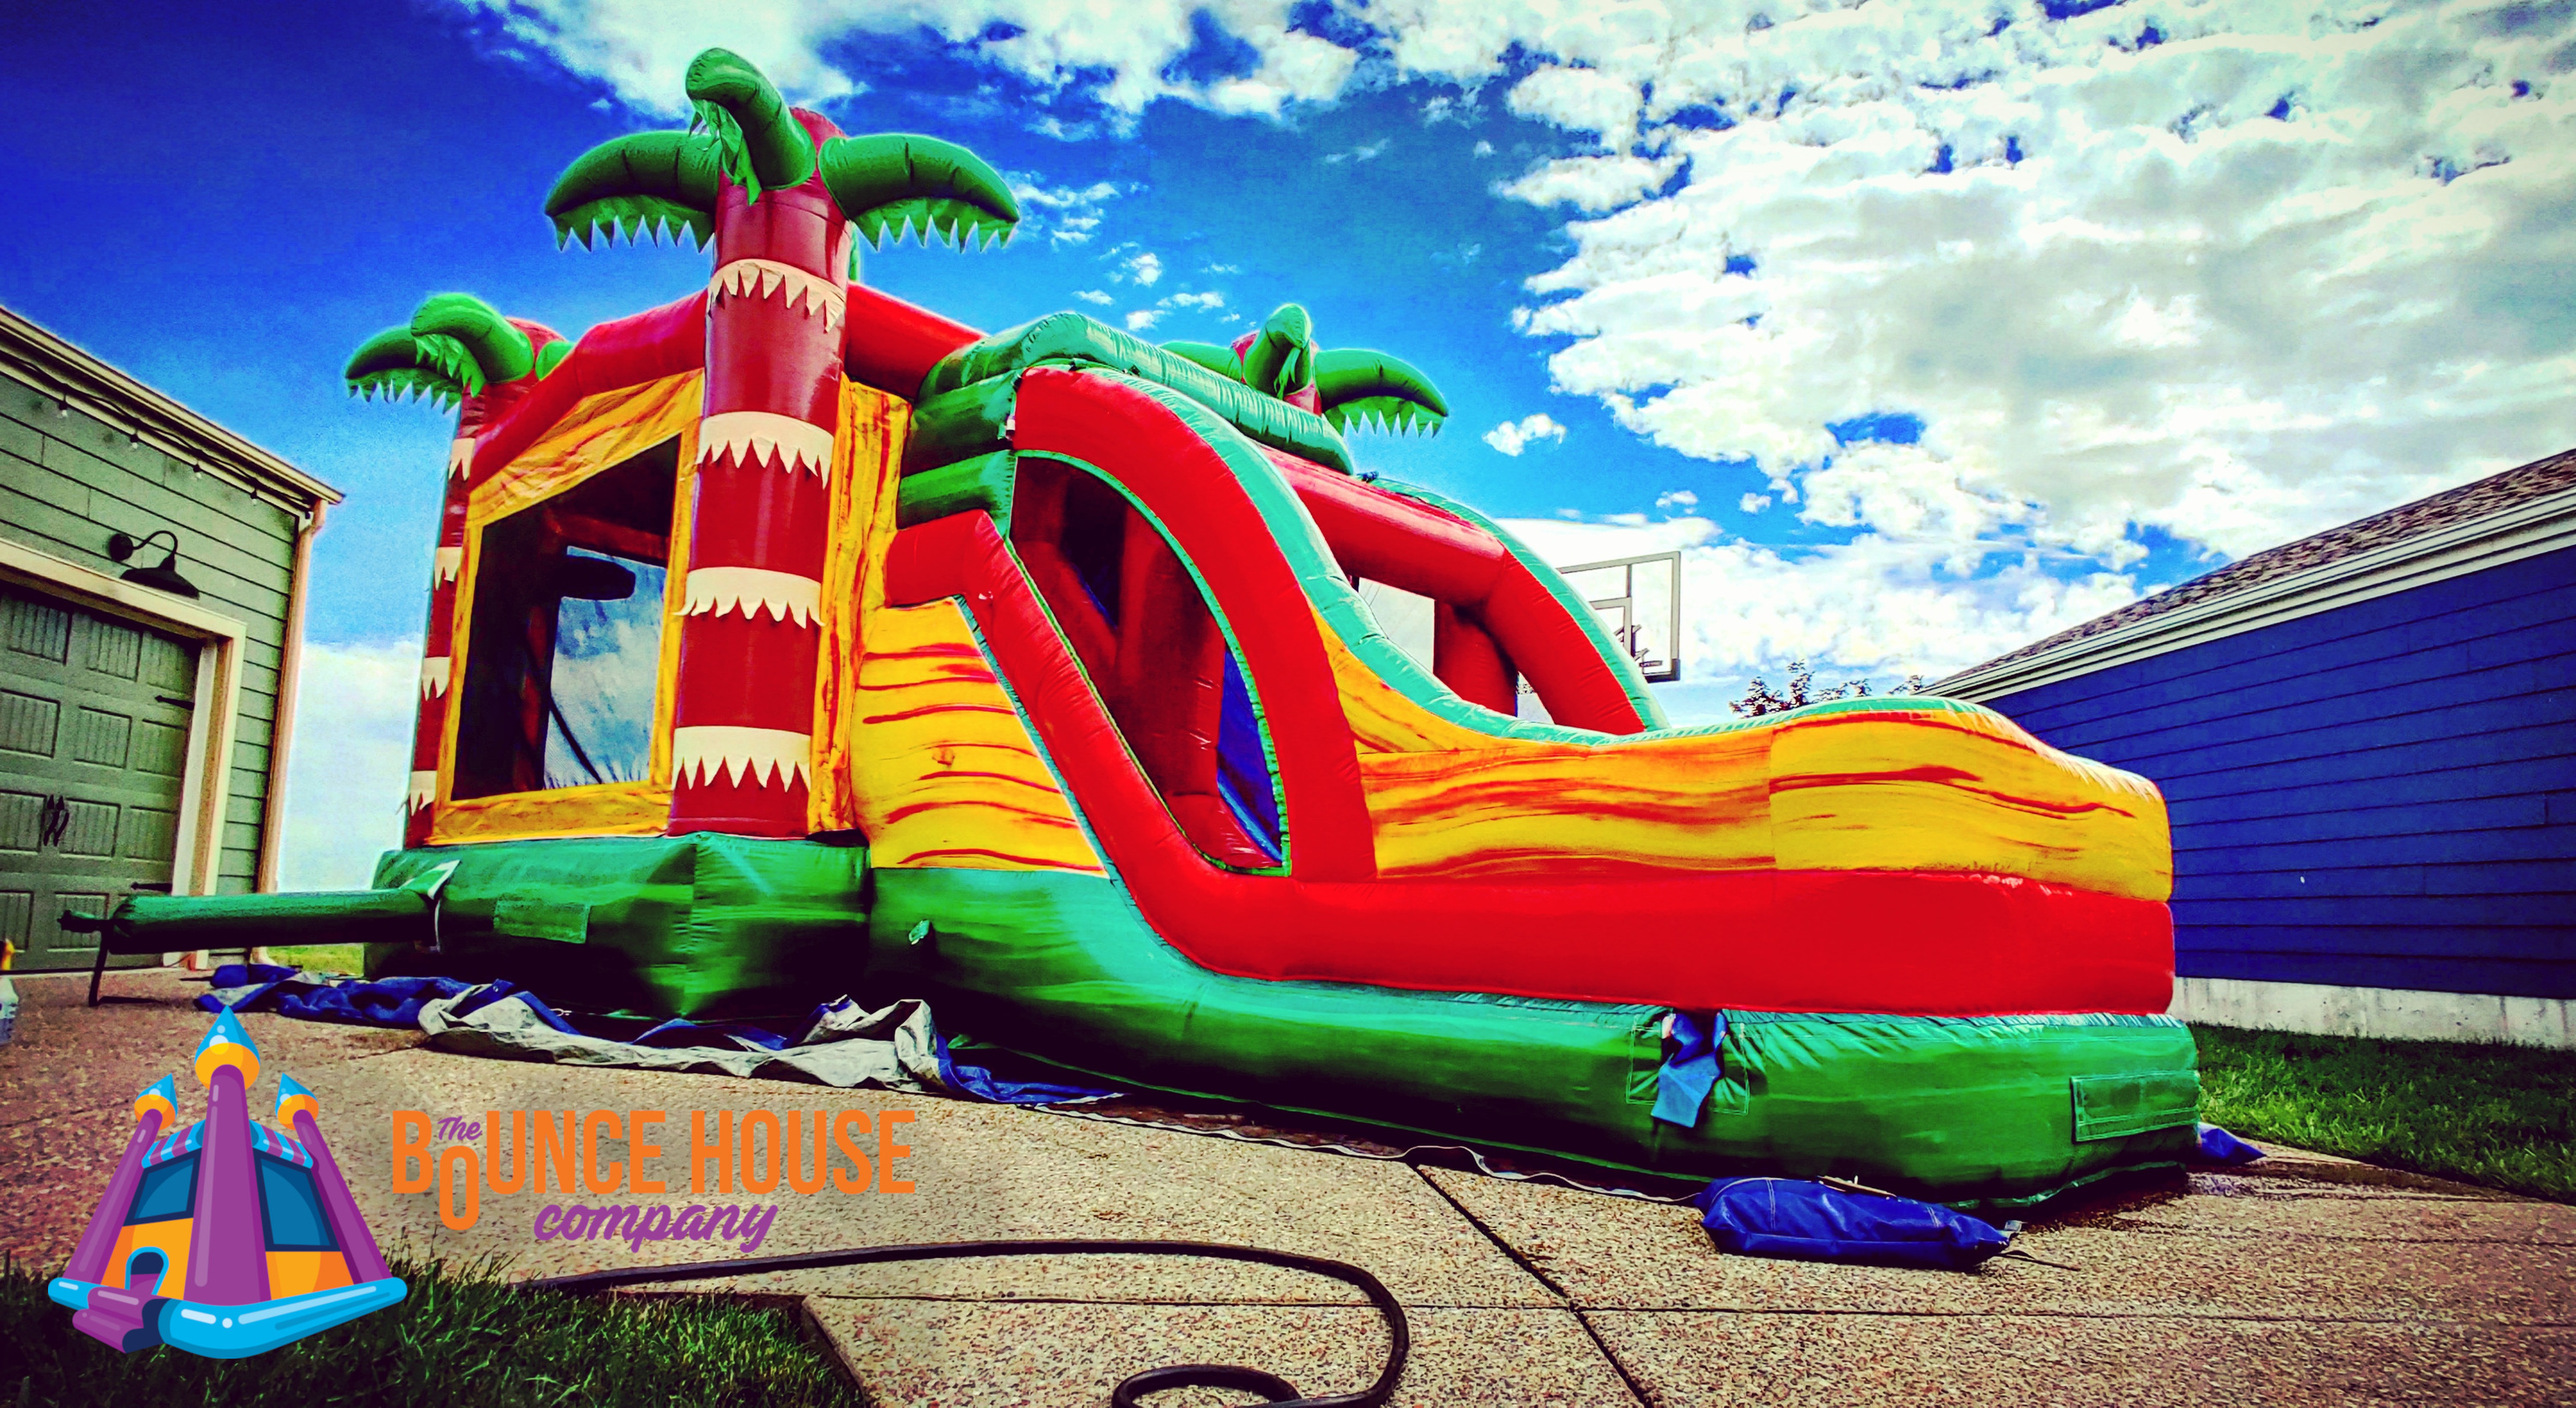 Inflatable Bounce House Slide Chicago - Truths thumbnail